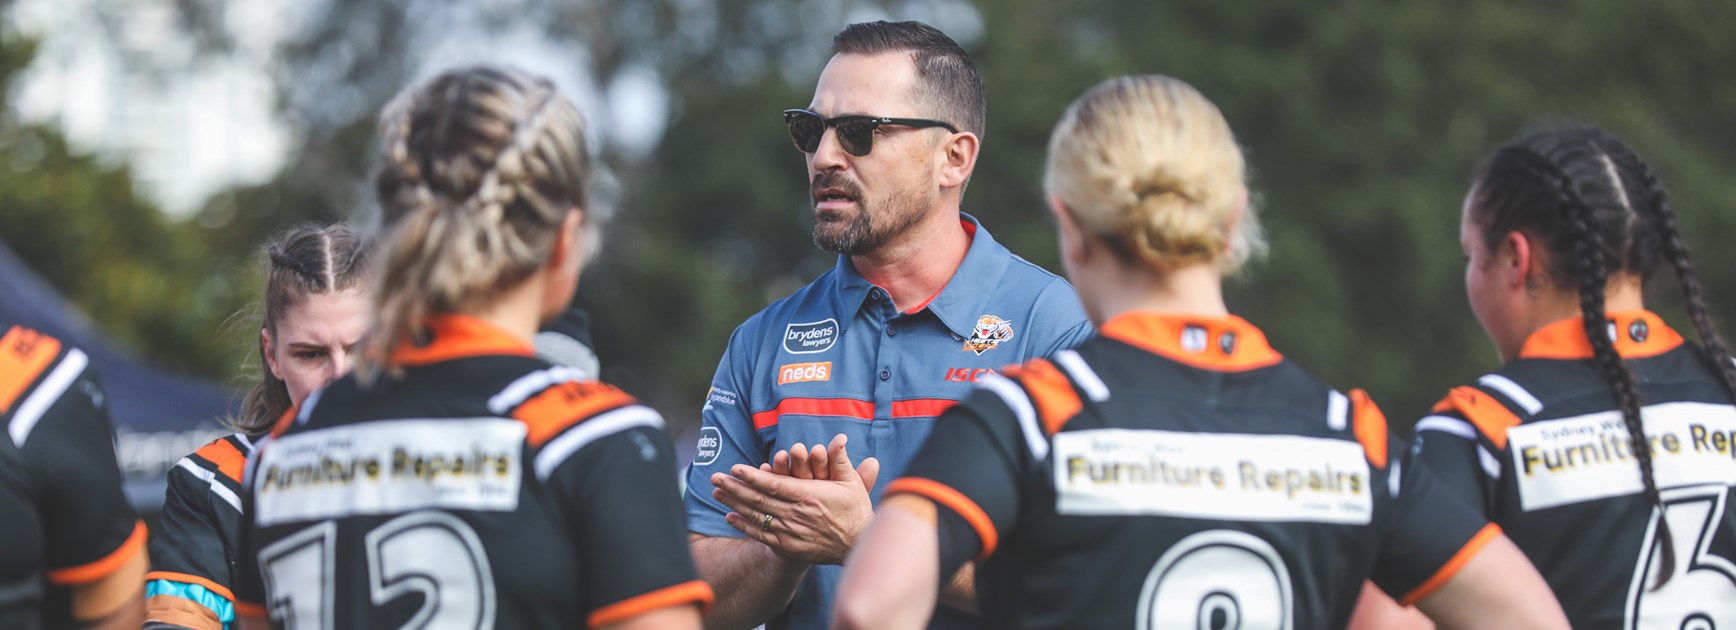 Wests Tigers return to action against in-form Roosters